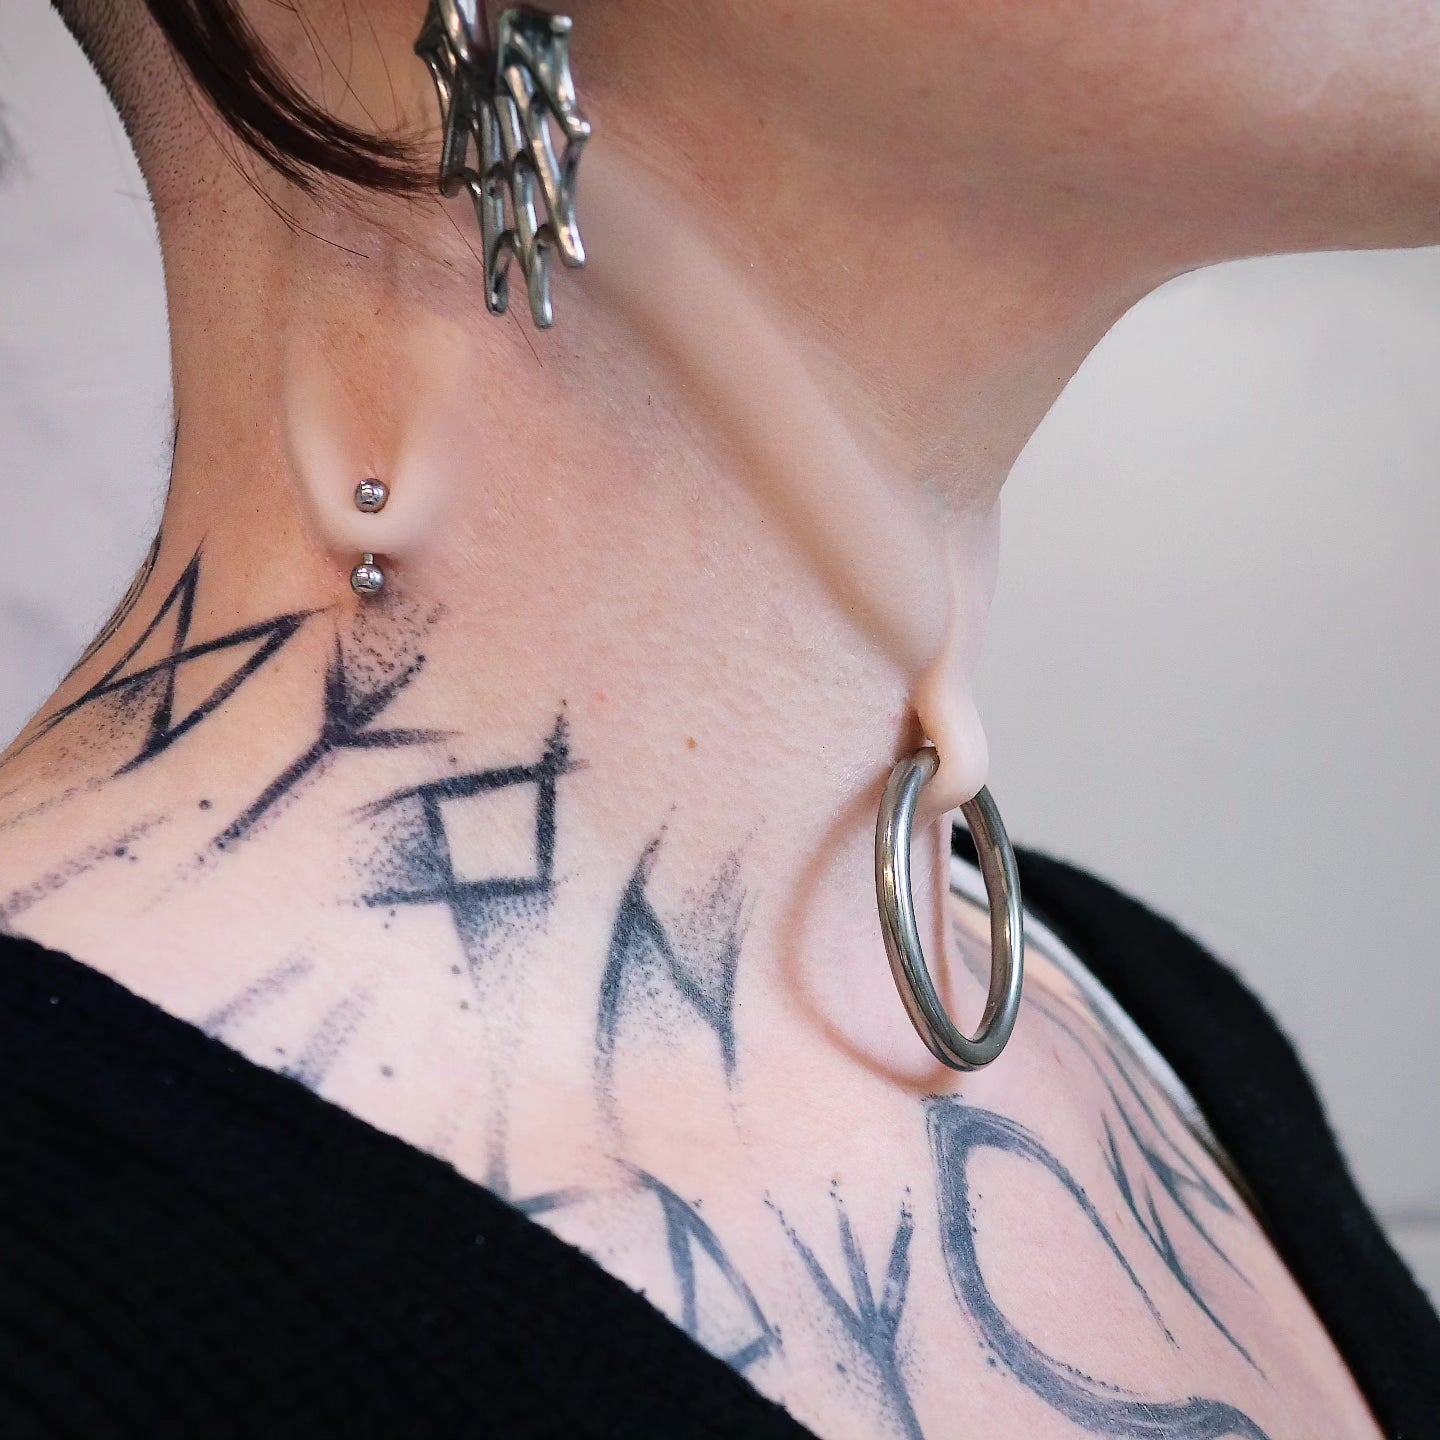 Woman's neck with stretched piercing and subdermal choker prosthetic